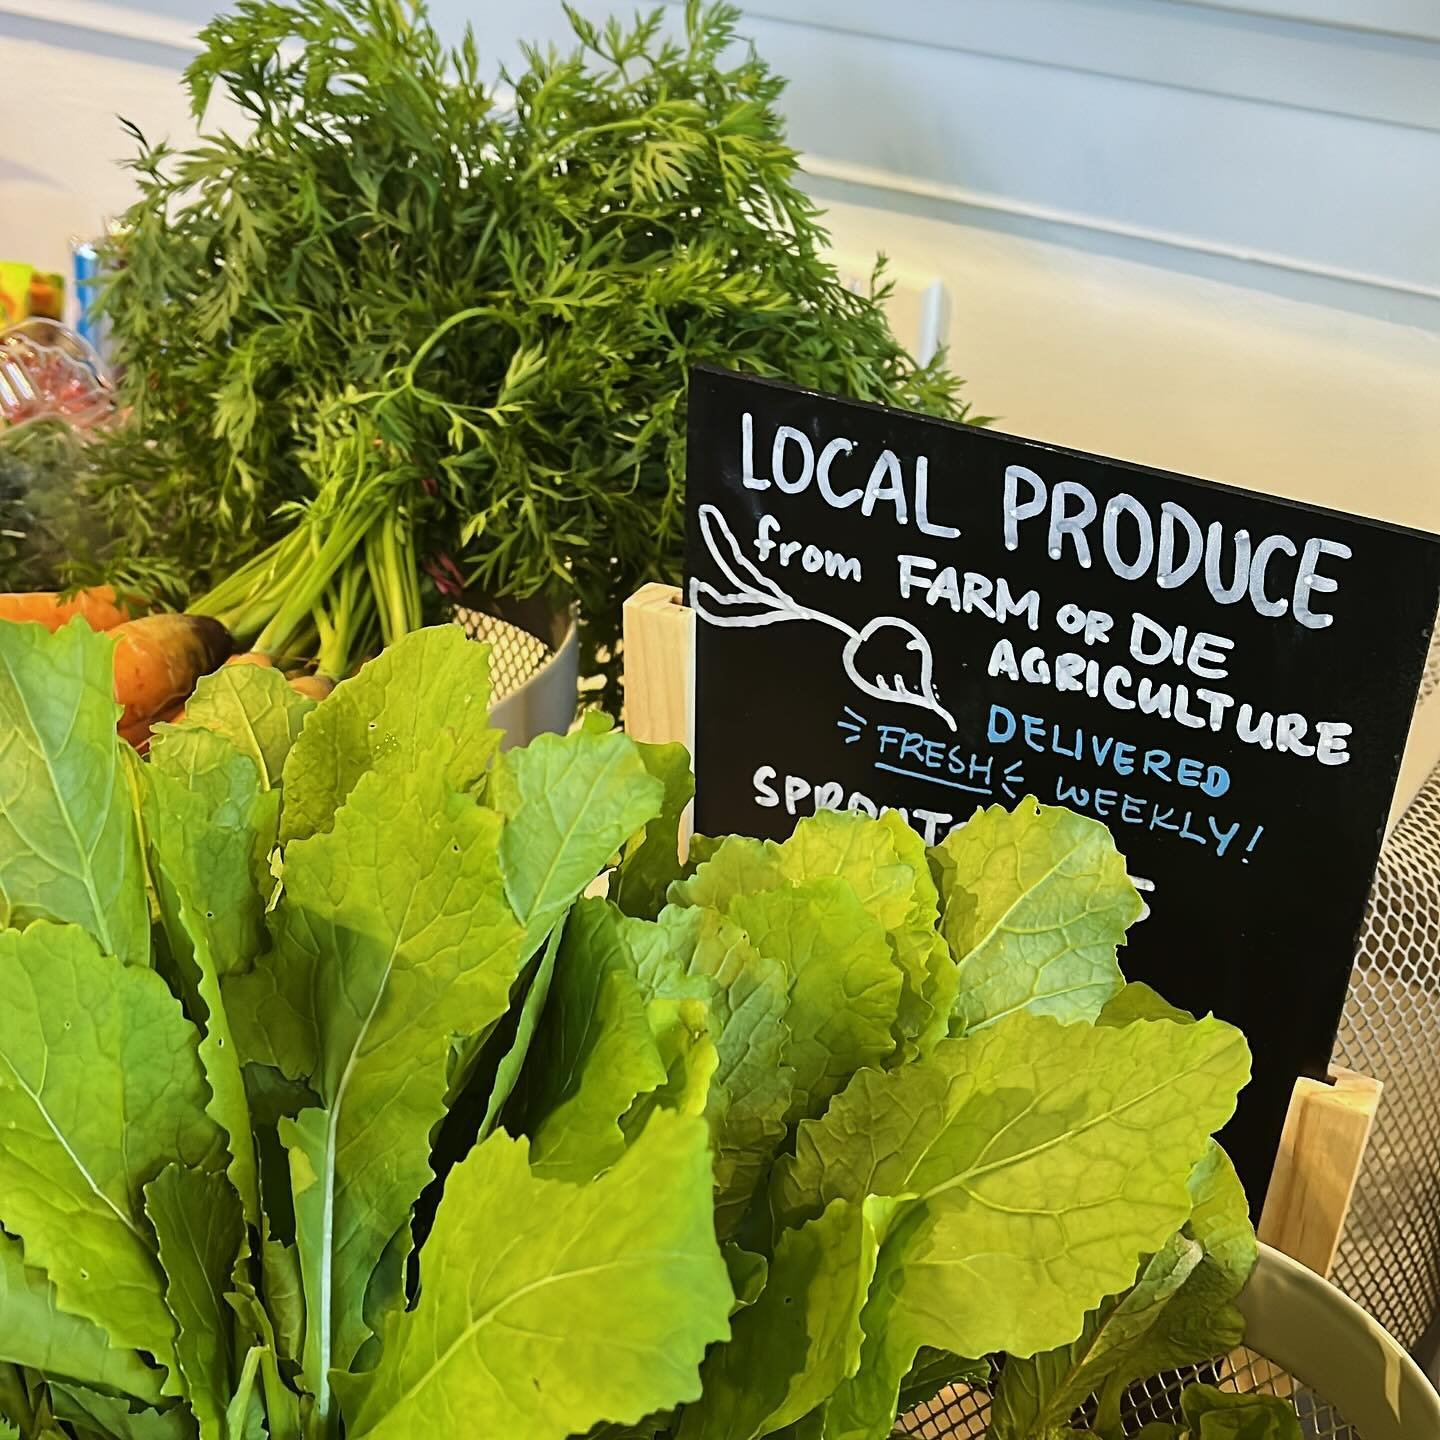 Fresh produce has arrived! We are so excited to supply @farmordieagriculture produce in the shop. We will have weekly deliveries of all the freshest veg (and fruit!) all summer long. Swing by Thursdays for first pick! 🥬🥕🫛🍅